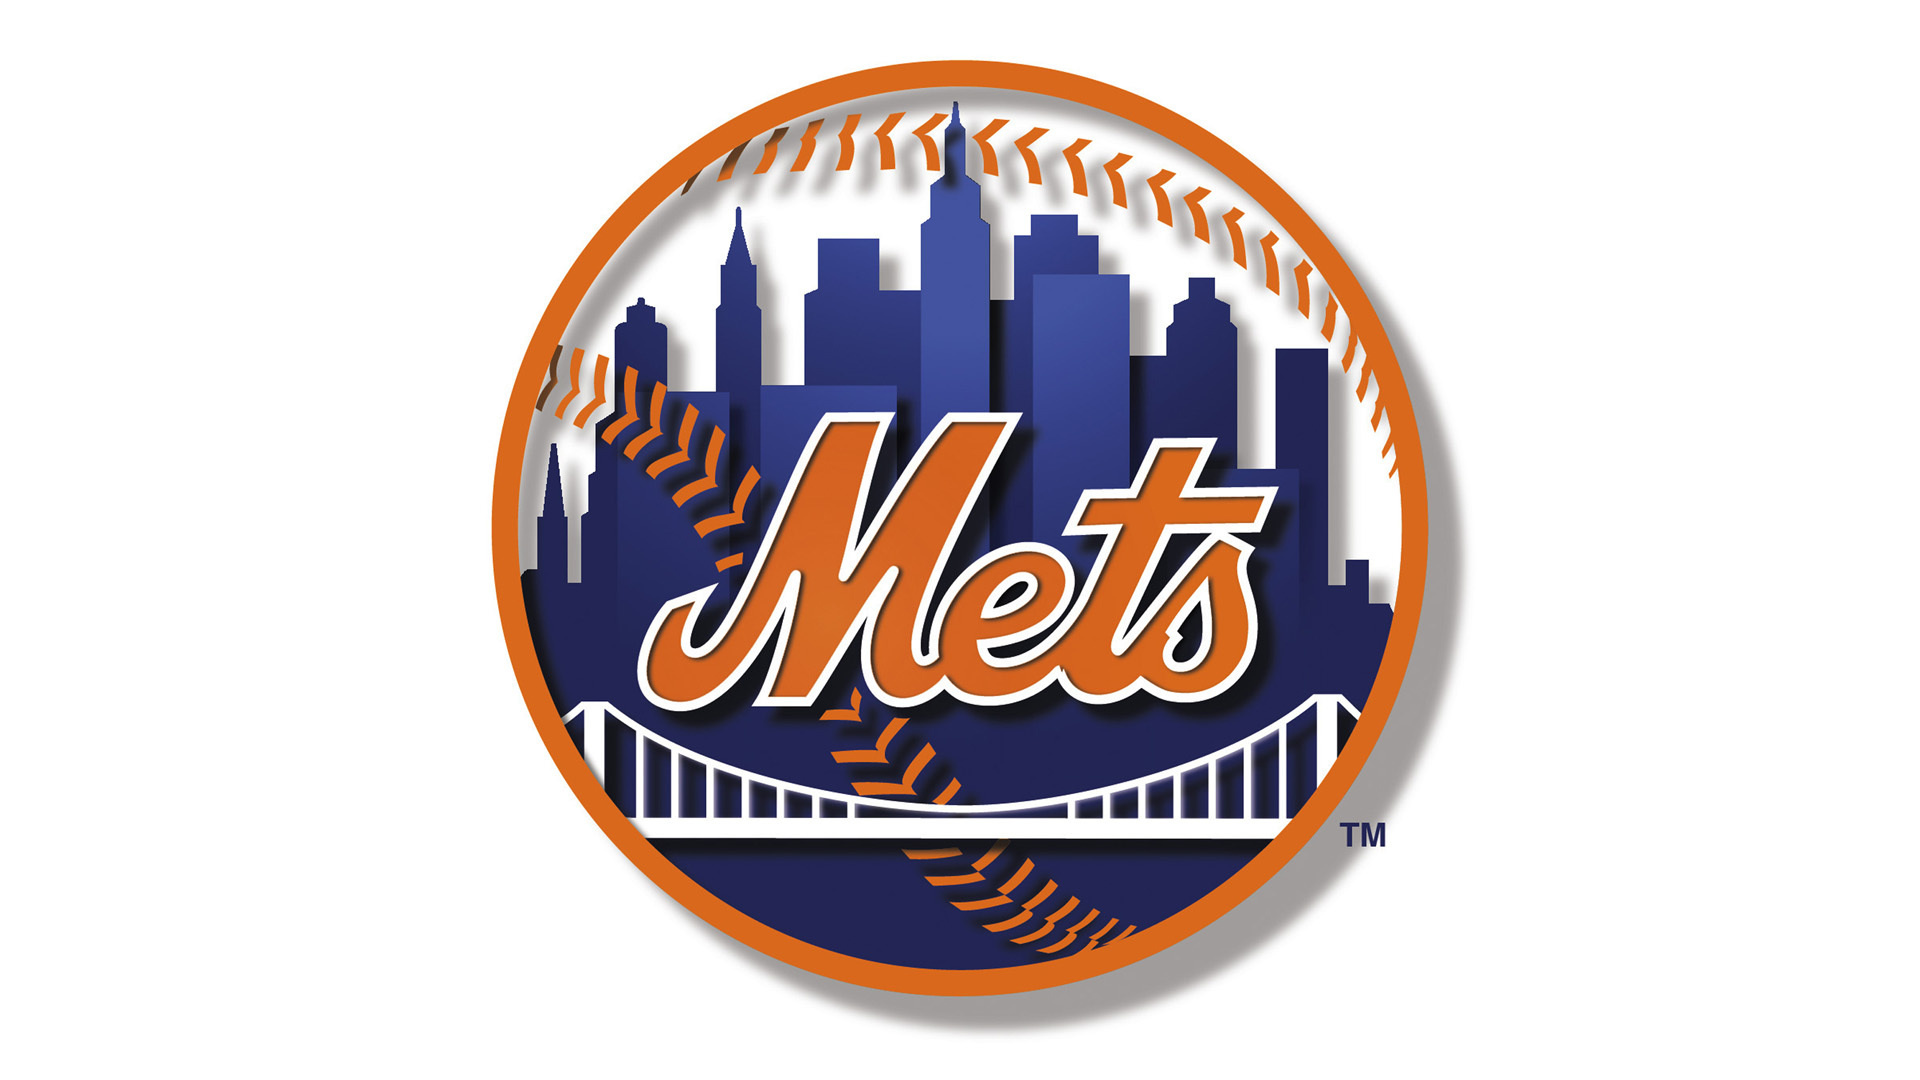 New York Mets, Team pictures, Player portraits, Game highlights, 1920x1080 Full HD Desktop